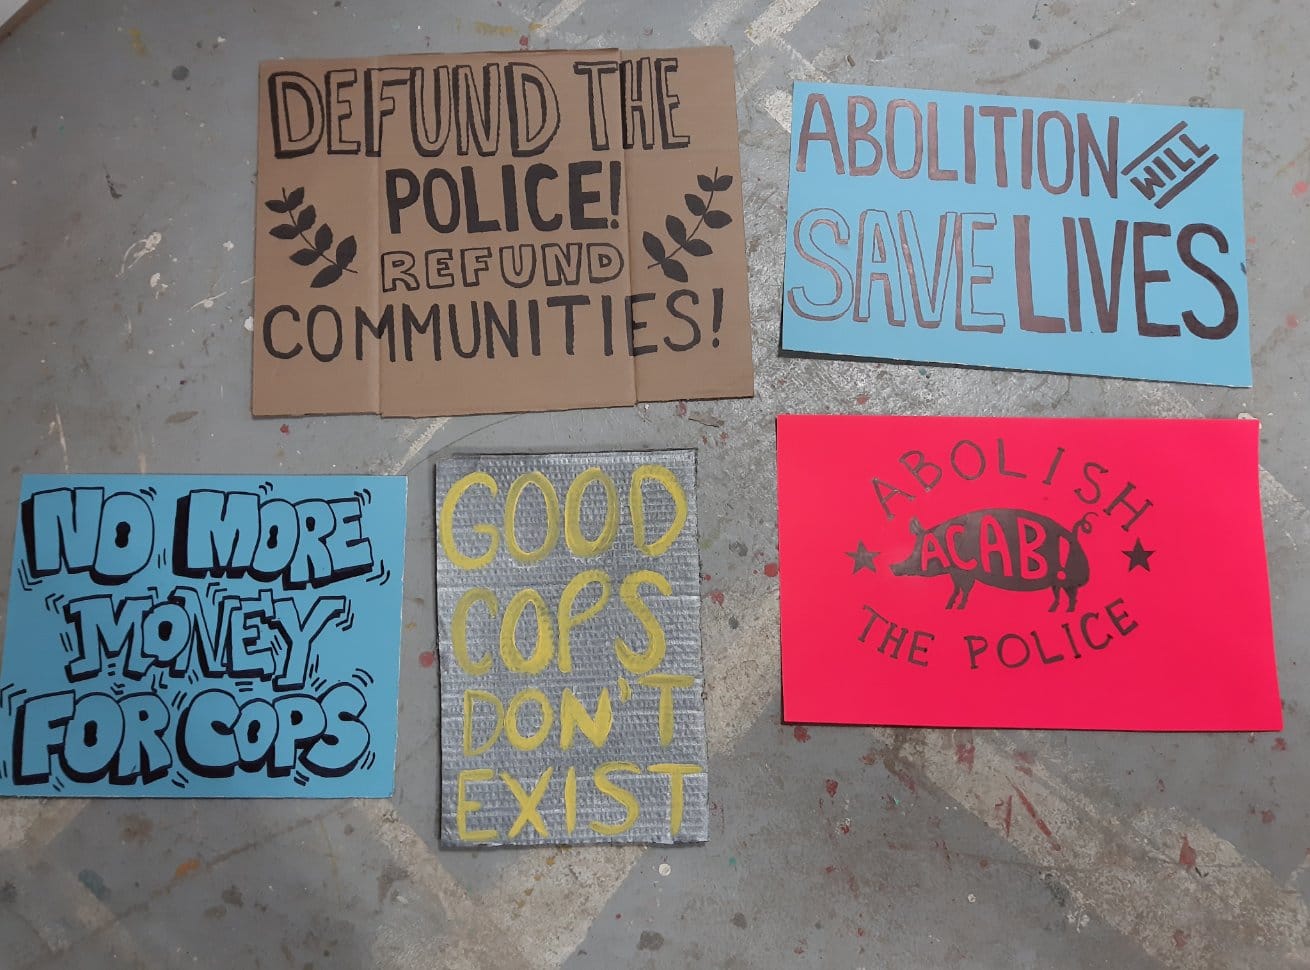 Photo of five signs on ground with messages that say "abolition saves lives" and "no more money for cops"